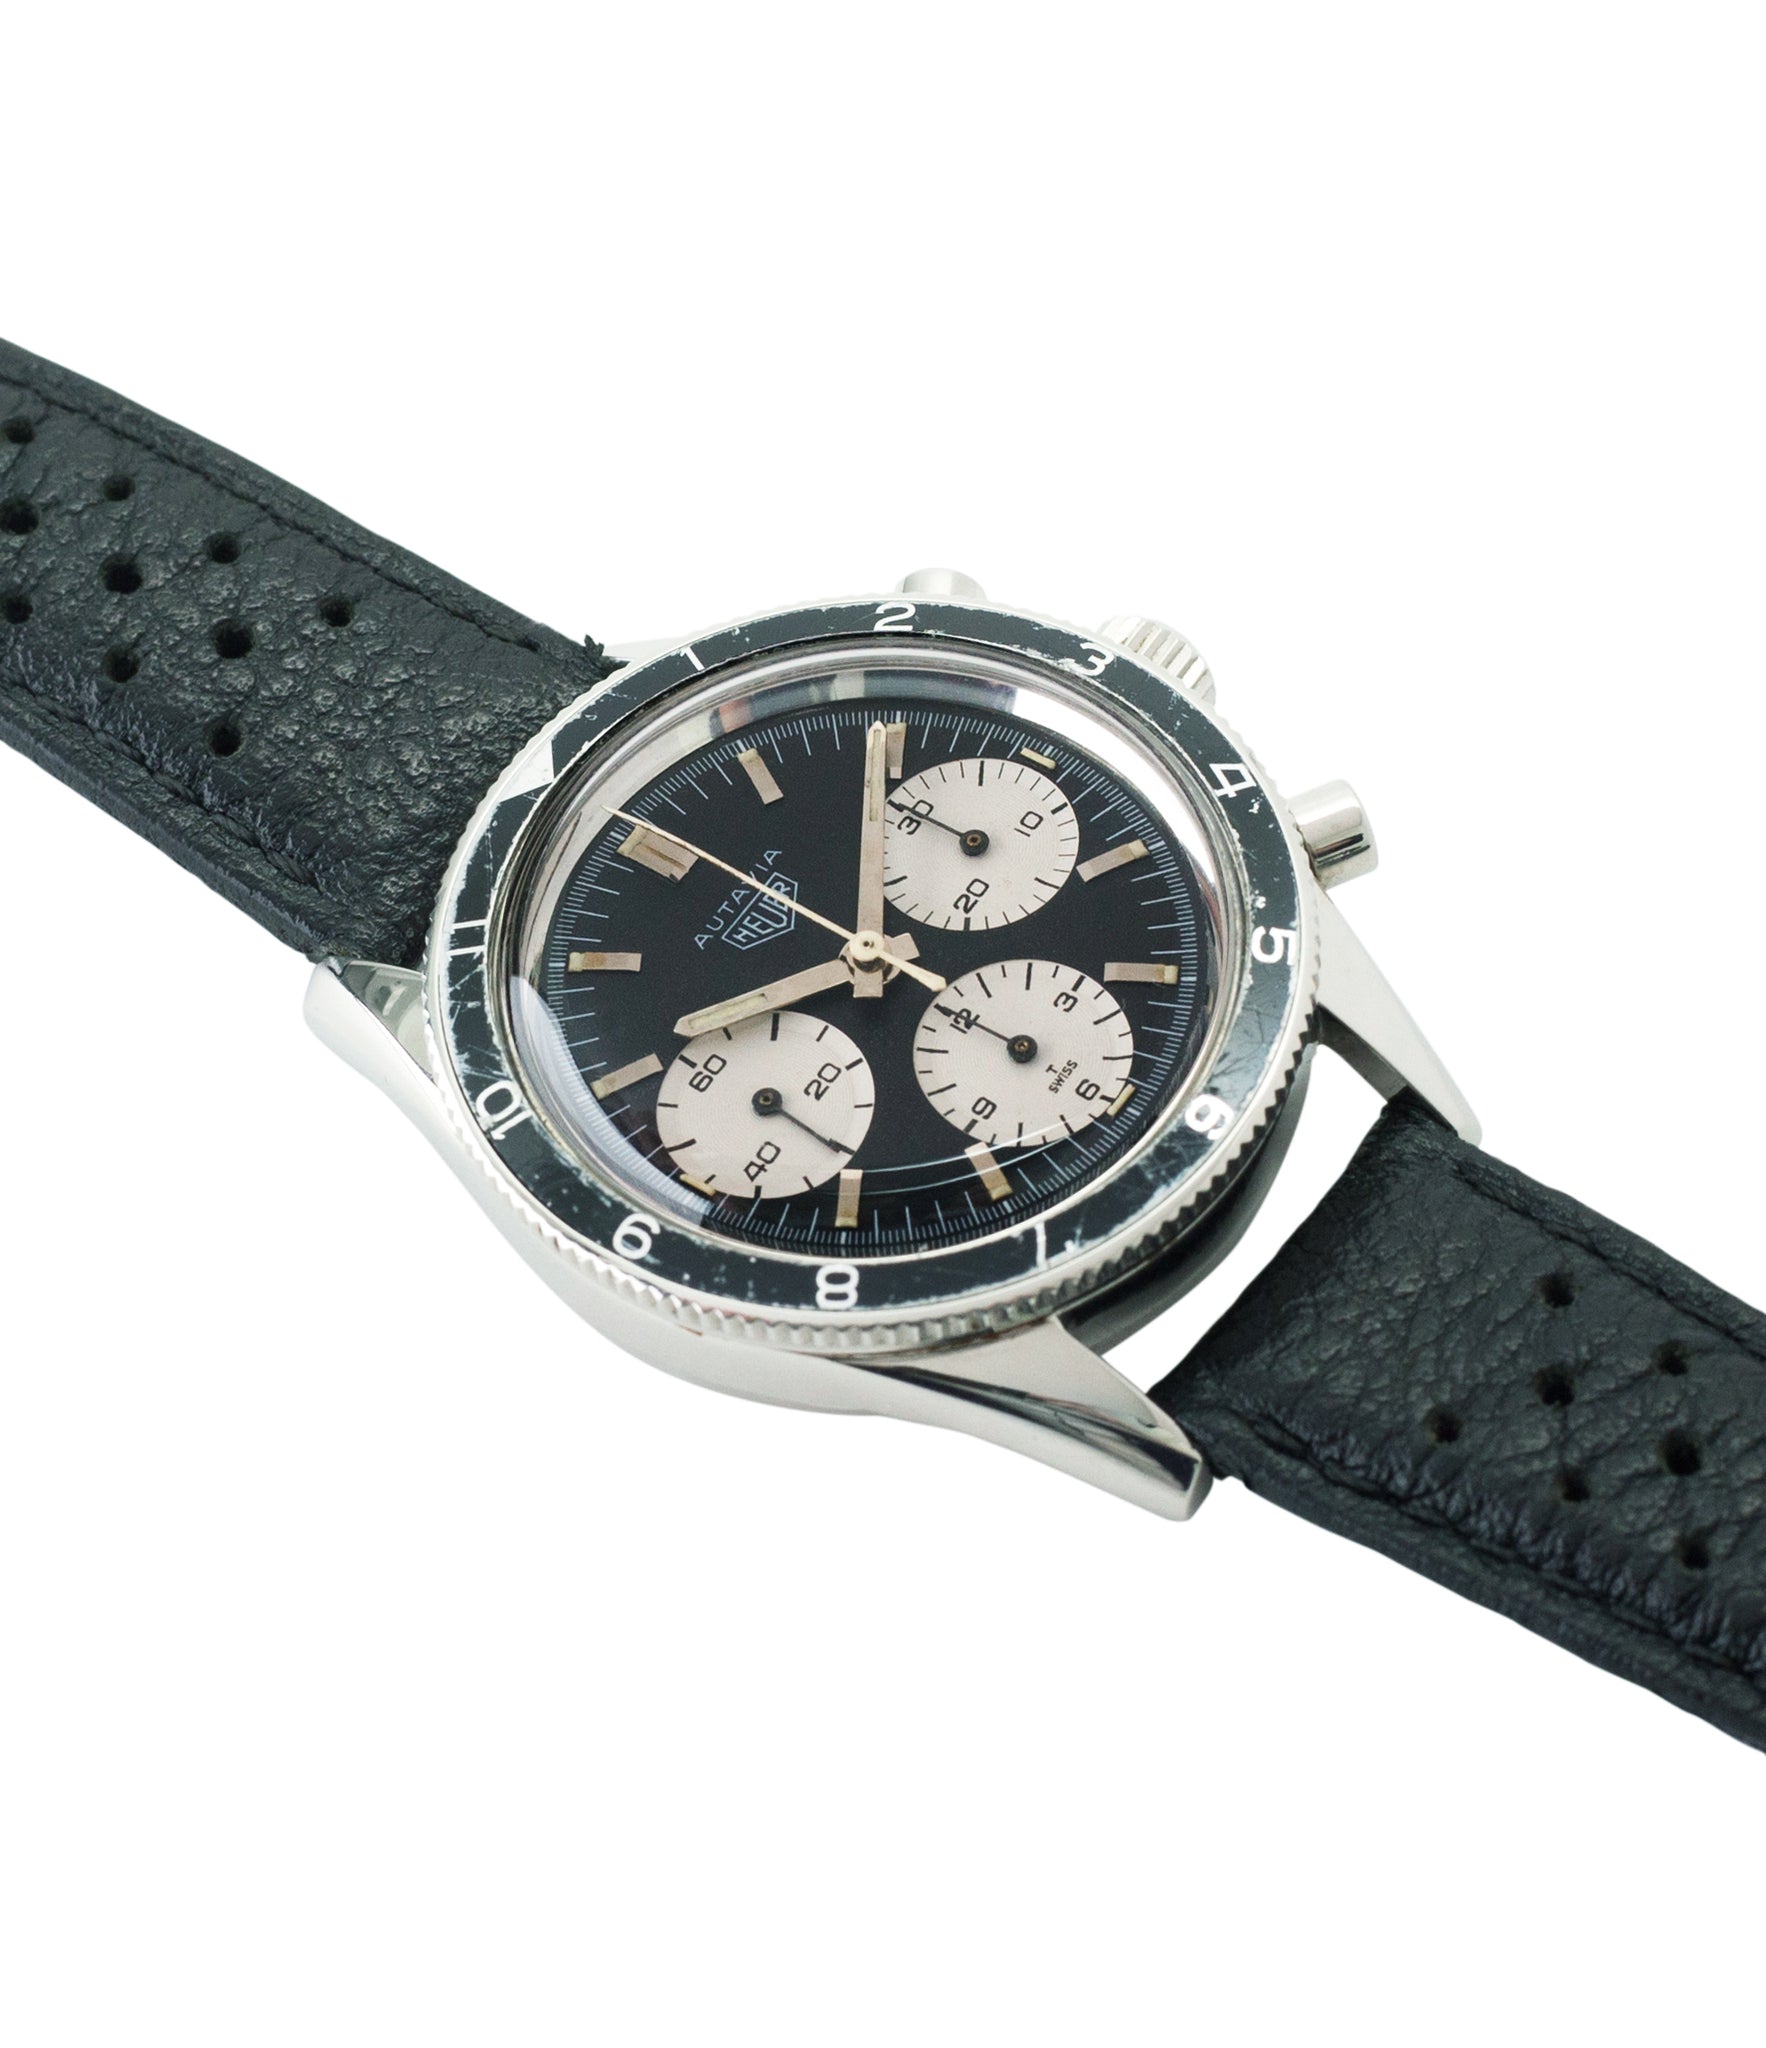 buy vintage Heuer Autavia Rindt 2446 Valjoux 72 manual-winding steel sport chronograph watch for sale online at A Collected Man London UK vintage rare watch specialist